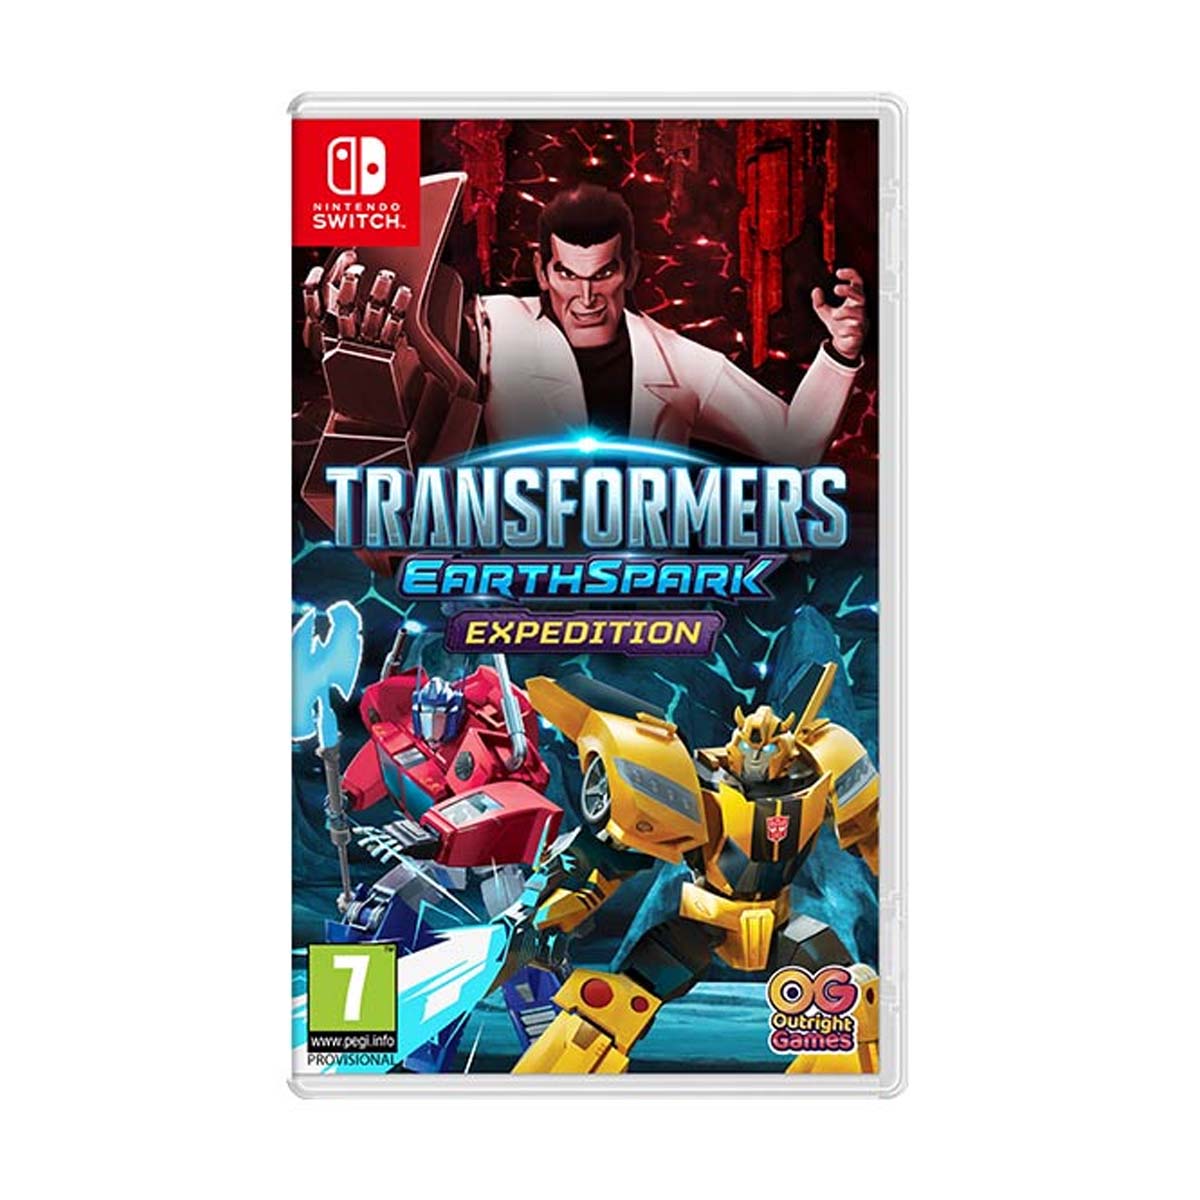 Expeditions nintendo switch. Transformers Earth Spark Expedition. The Transformers (игра). Трансформер Switch. Игрушка с дисками трансформер.